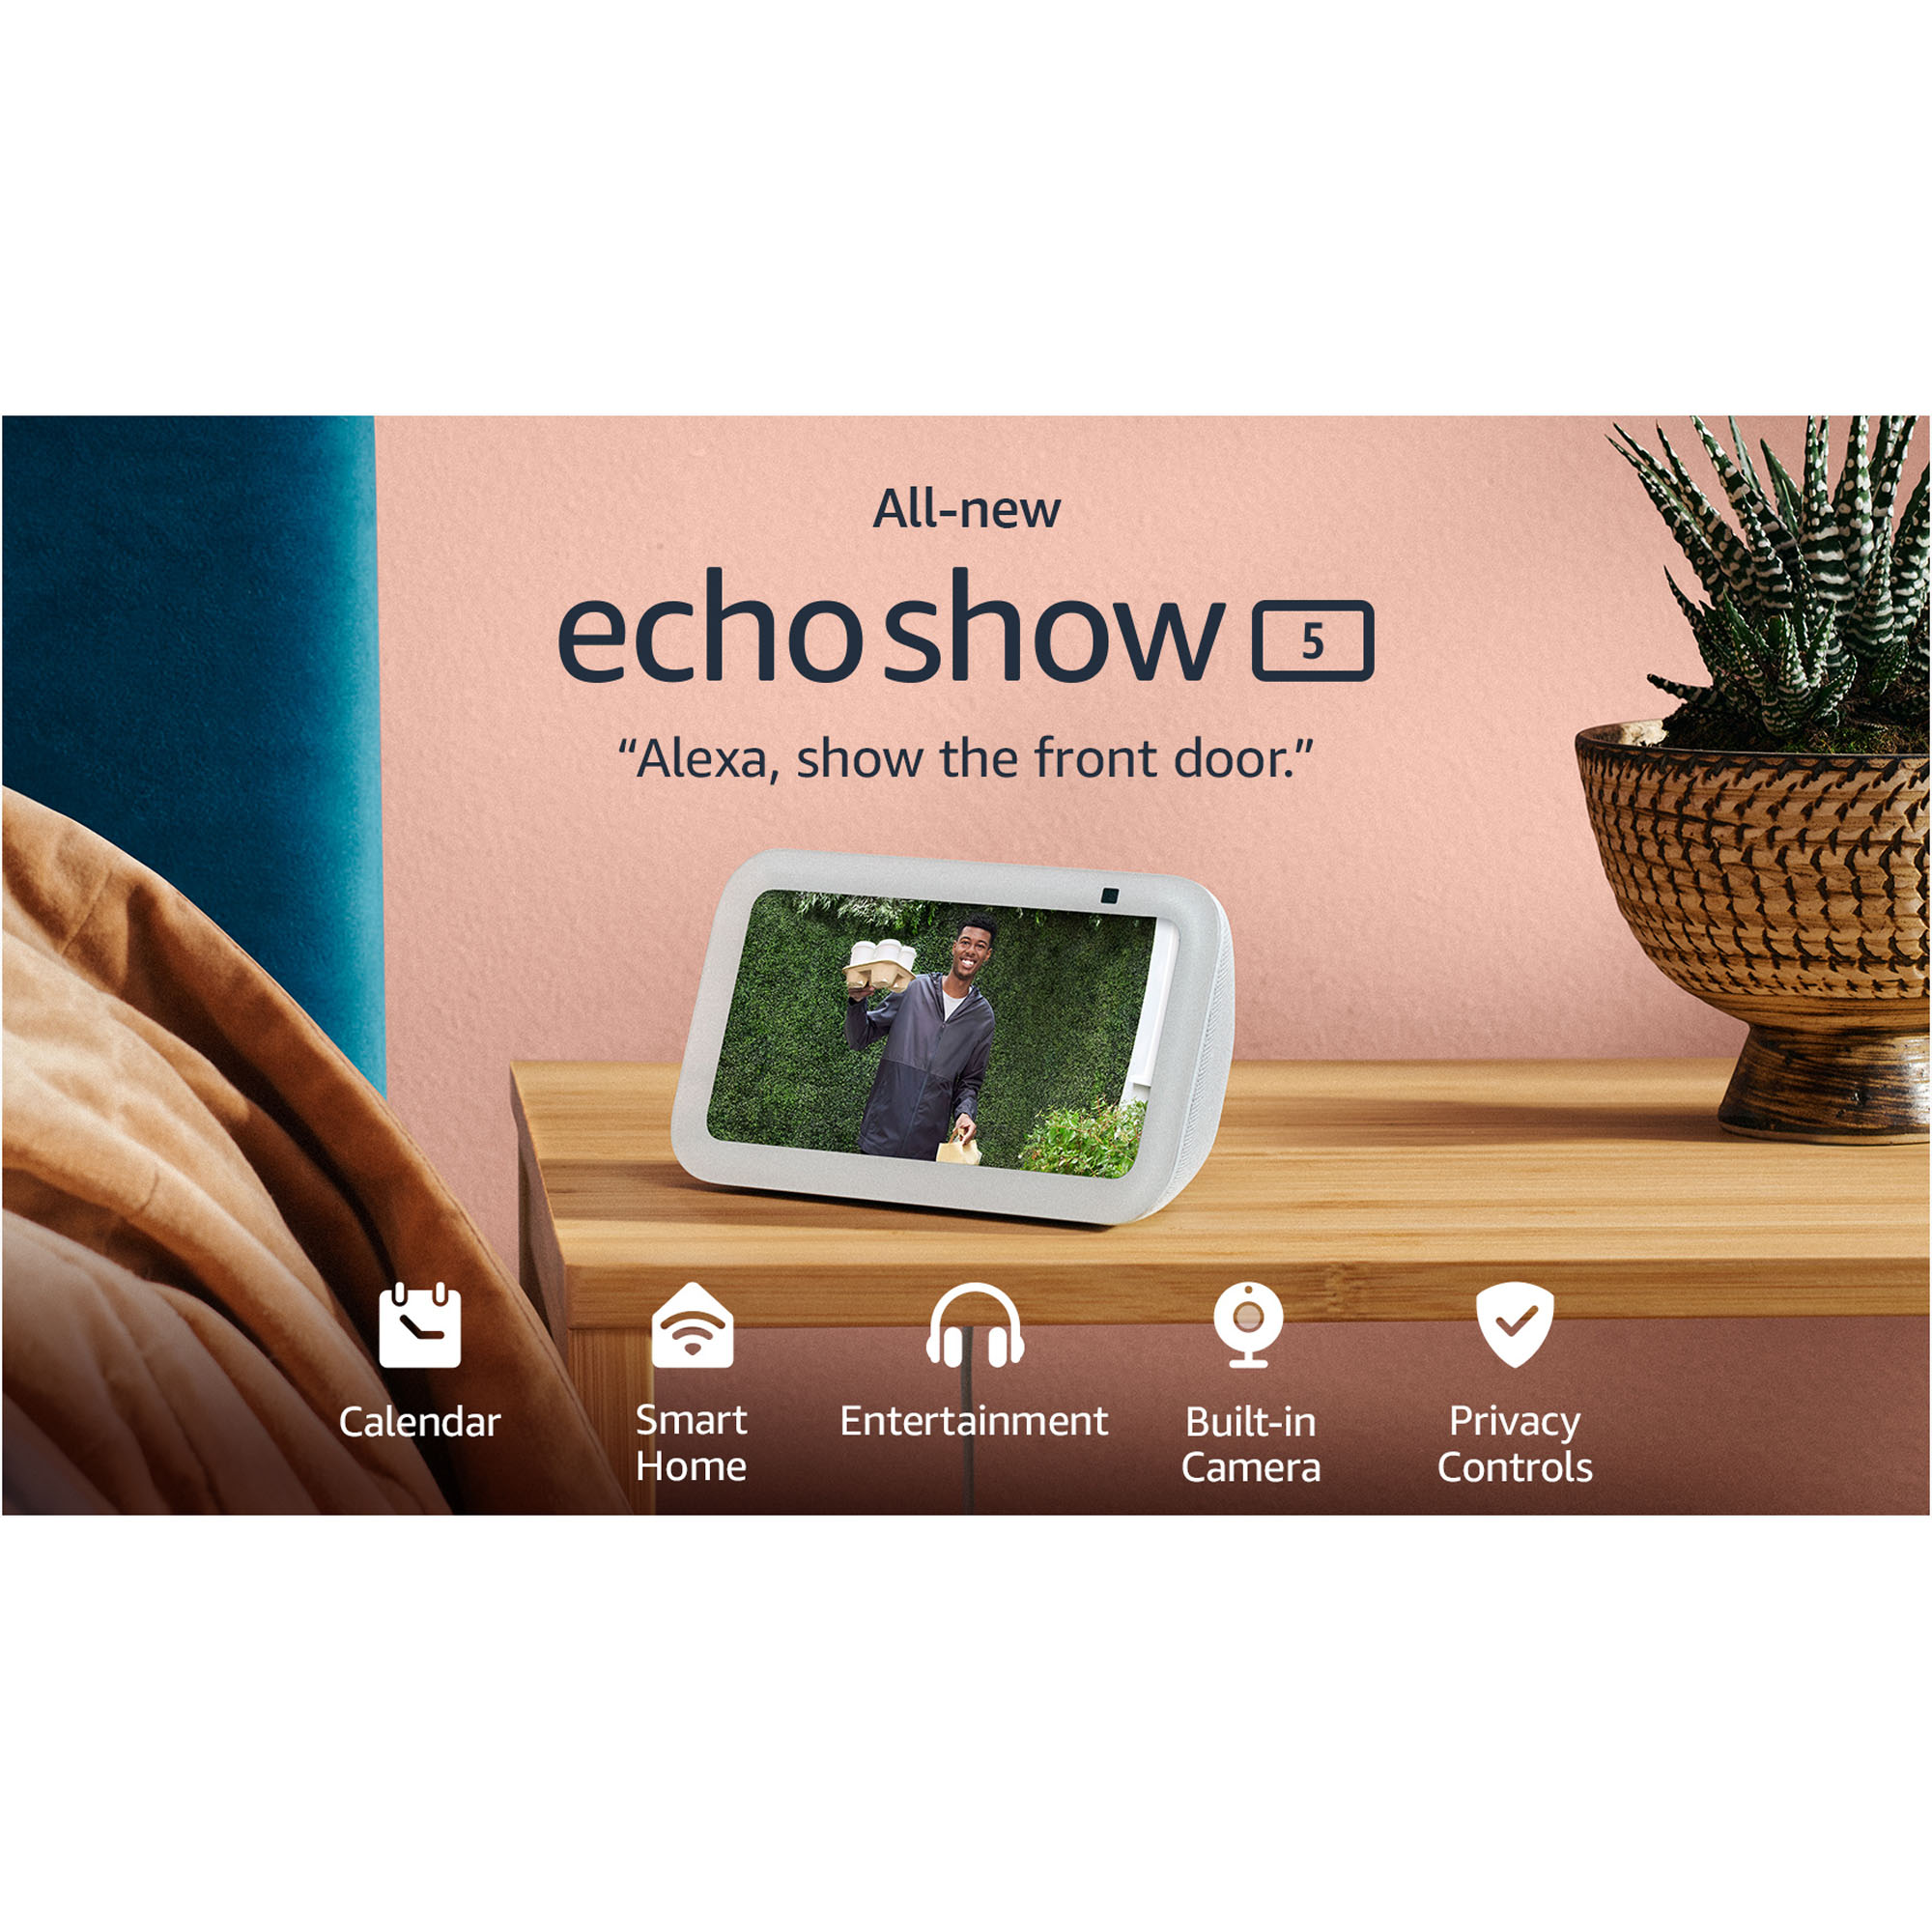 Echo Hub hands-on: first impressions of 's new Alexa smart